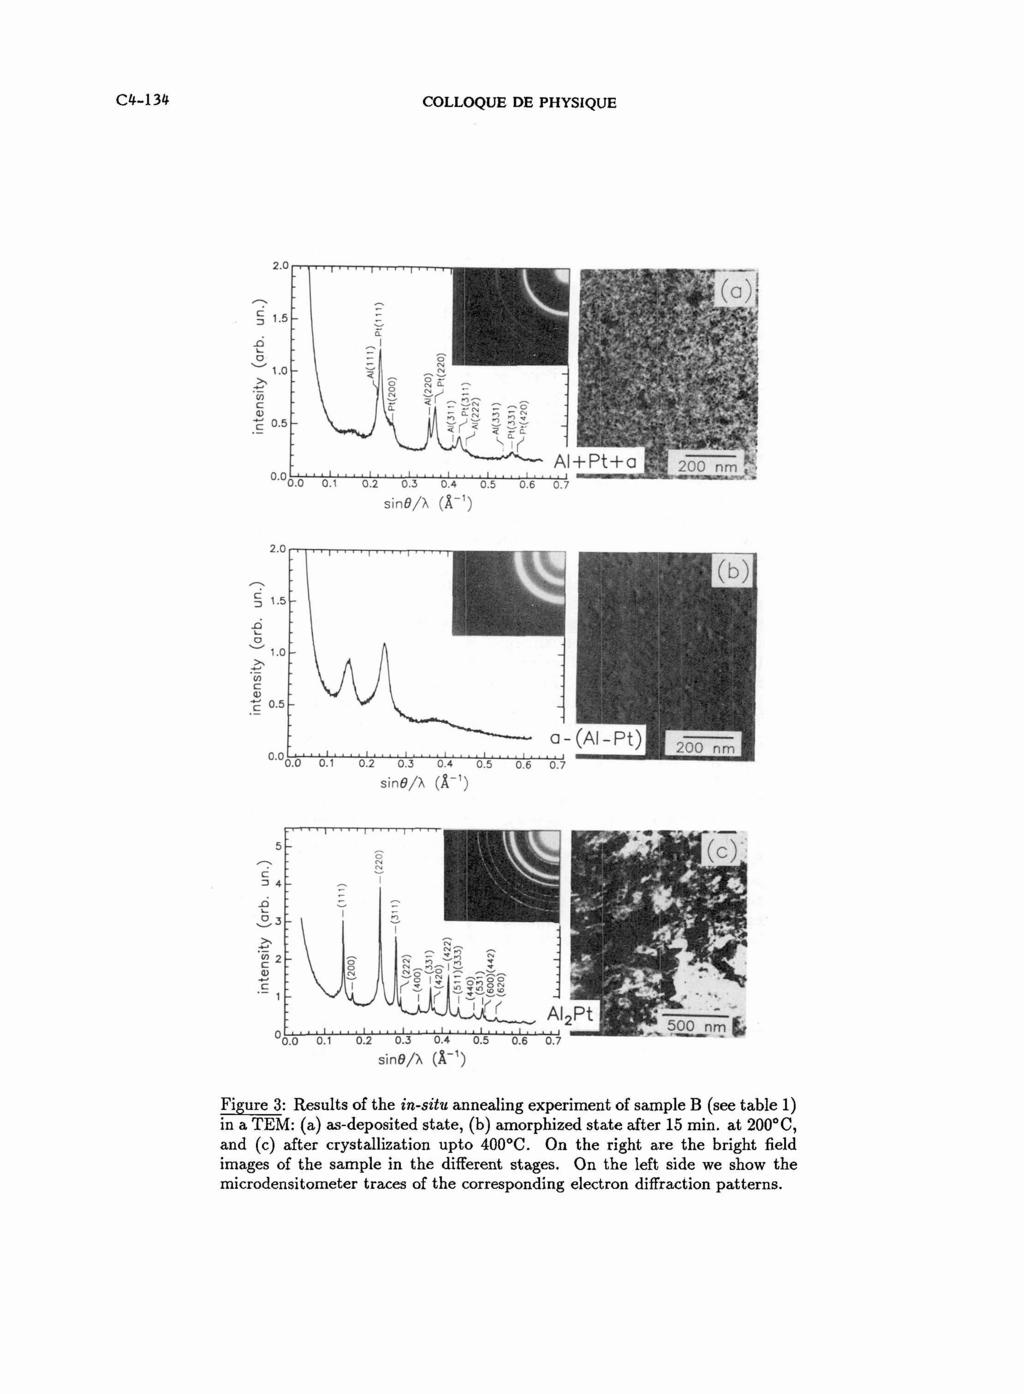 C4134 COLLOQUE DE PHYSIQUE sine/h (A') Figure 3: Results of the insitu annealing experiment of sample B (see table 1) in a TEM: (a) asdeposited state, (b) amorphized state after 15 min.